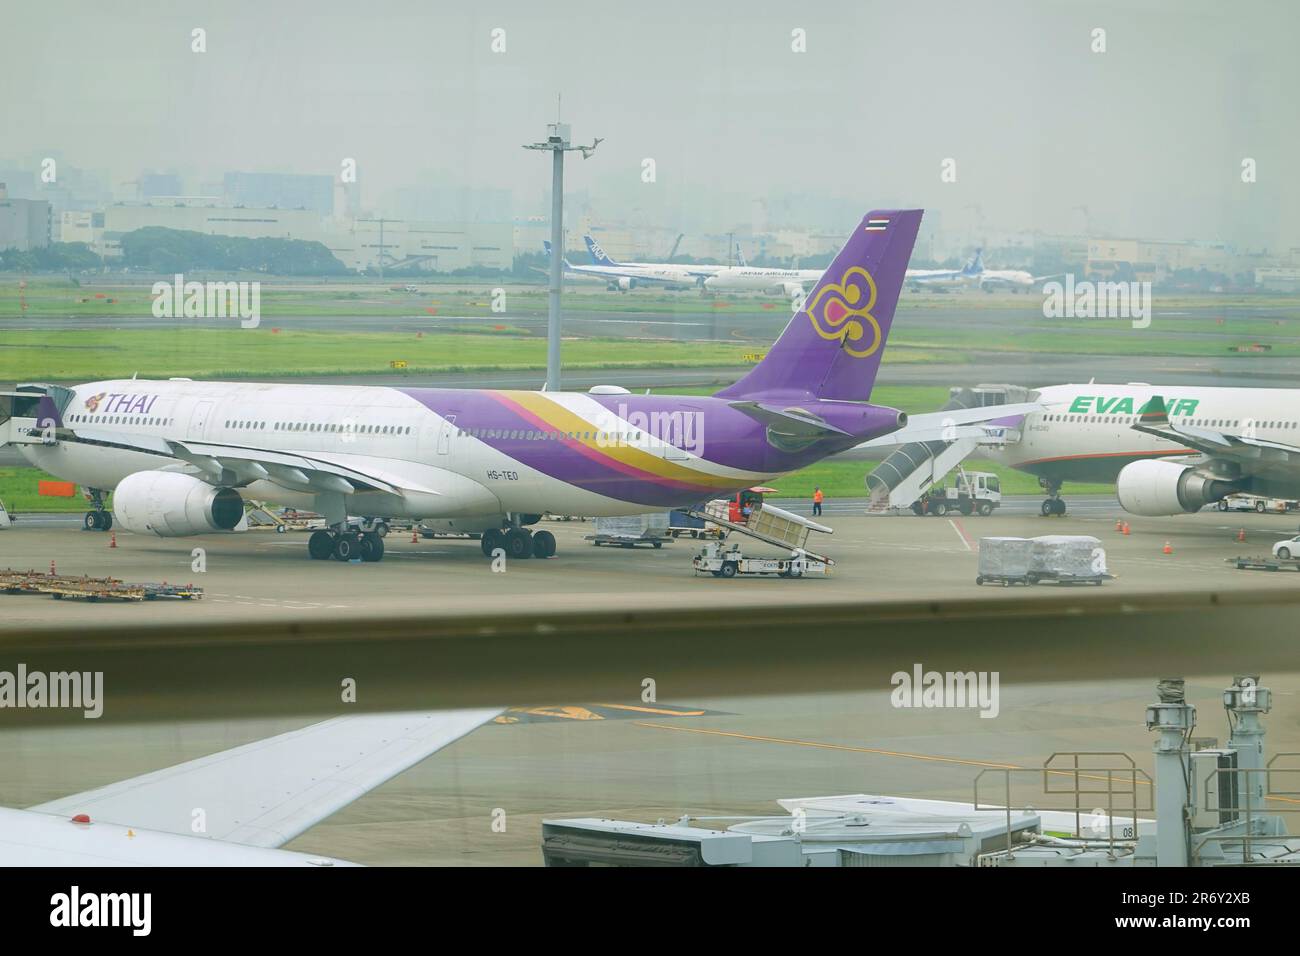 Thai Airways Flight TG683 (A330-300, Reg, HS-TEO), which collided with EVA Air Flight BR189 (A330-300, Reg. B-16340) at Haneda Airport, damaging the winglet on the right wing tip, on June 10, 2023. (Photo by Tadayuki YOSHIKAWA/Aviation Wire) Stock Photo